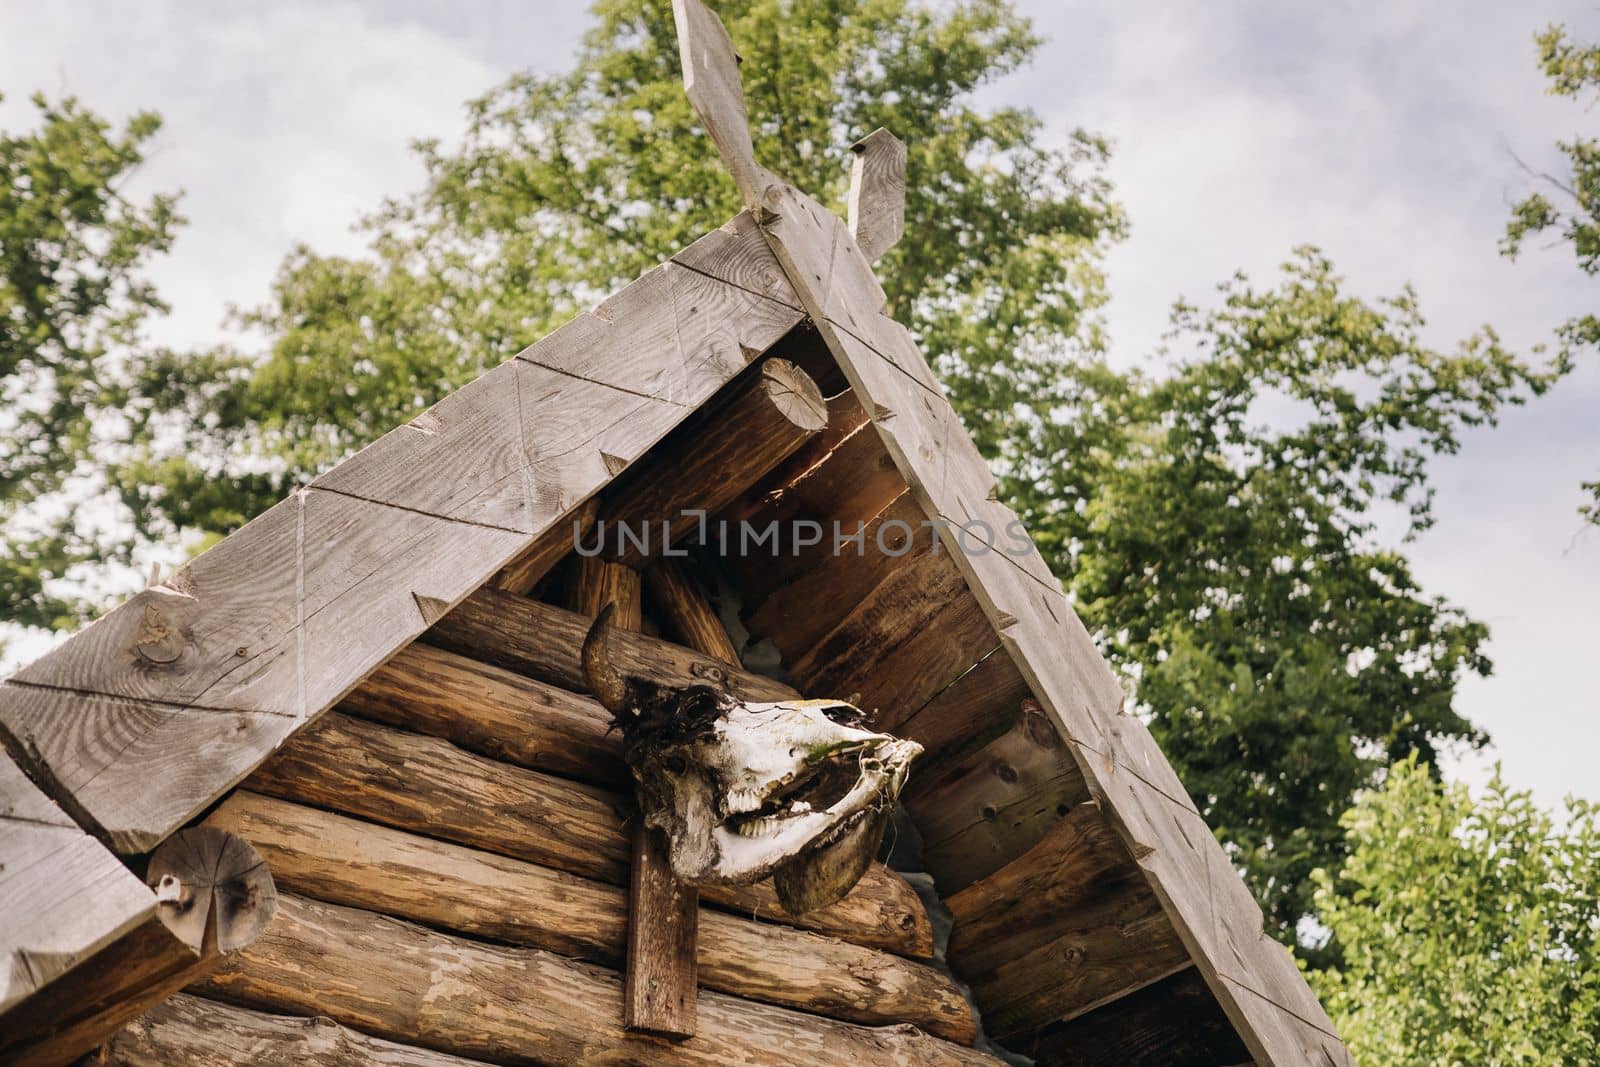 A close-up of a partially destroyed cattle skull that hangs over the entrance to an old triangular house by Lobachad